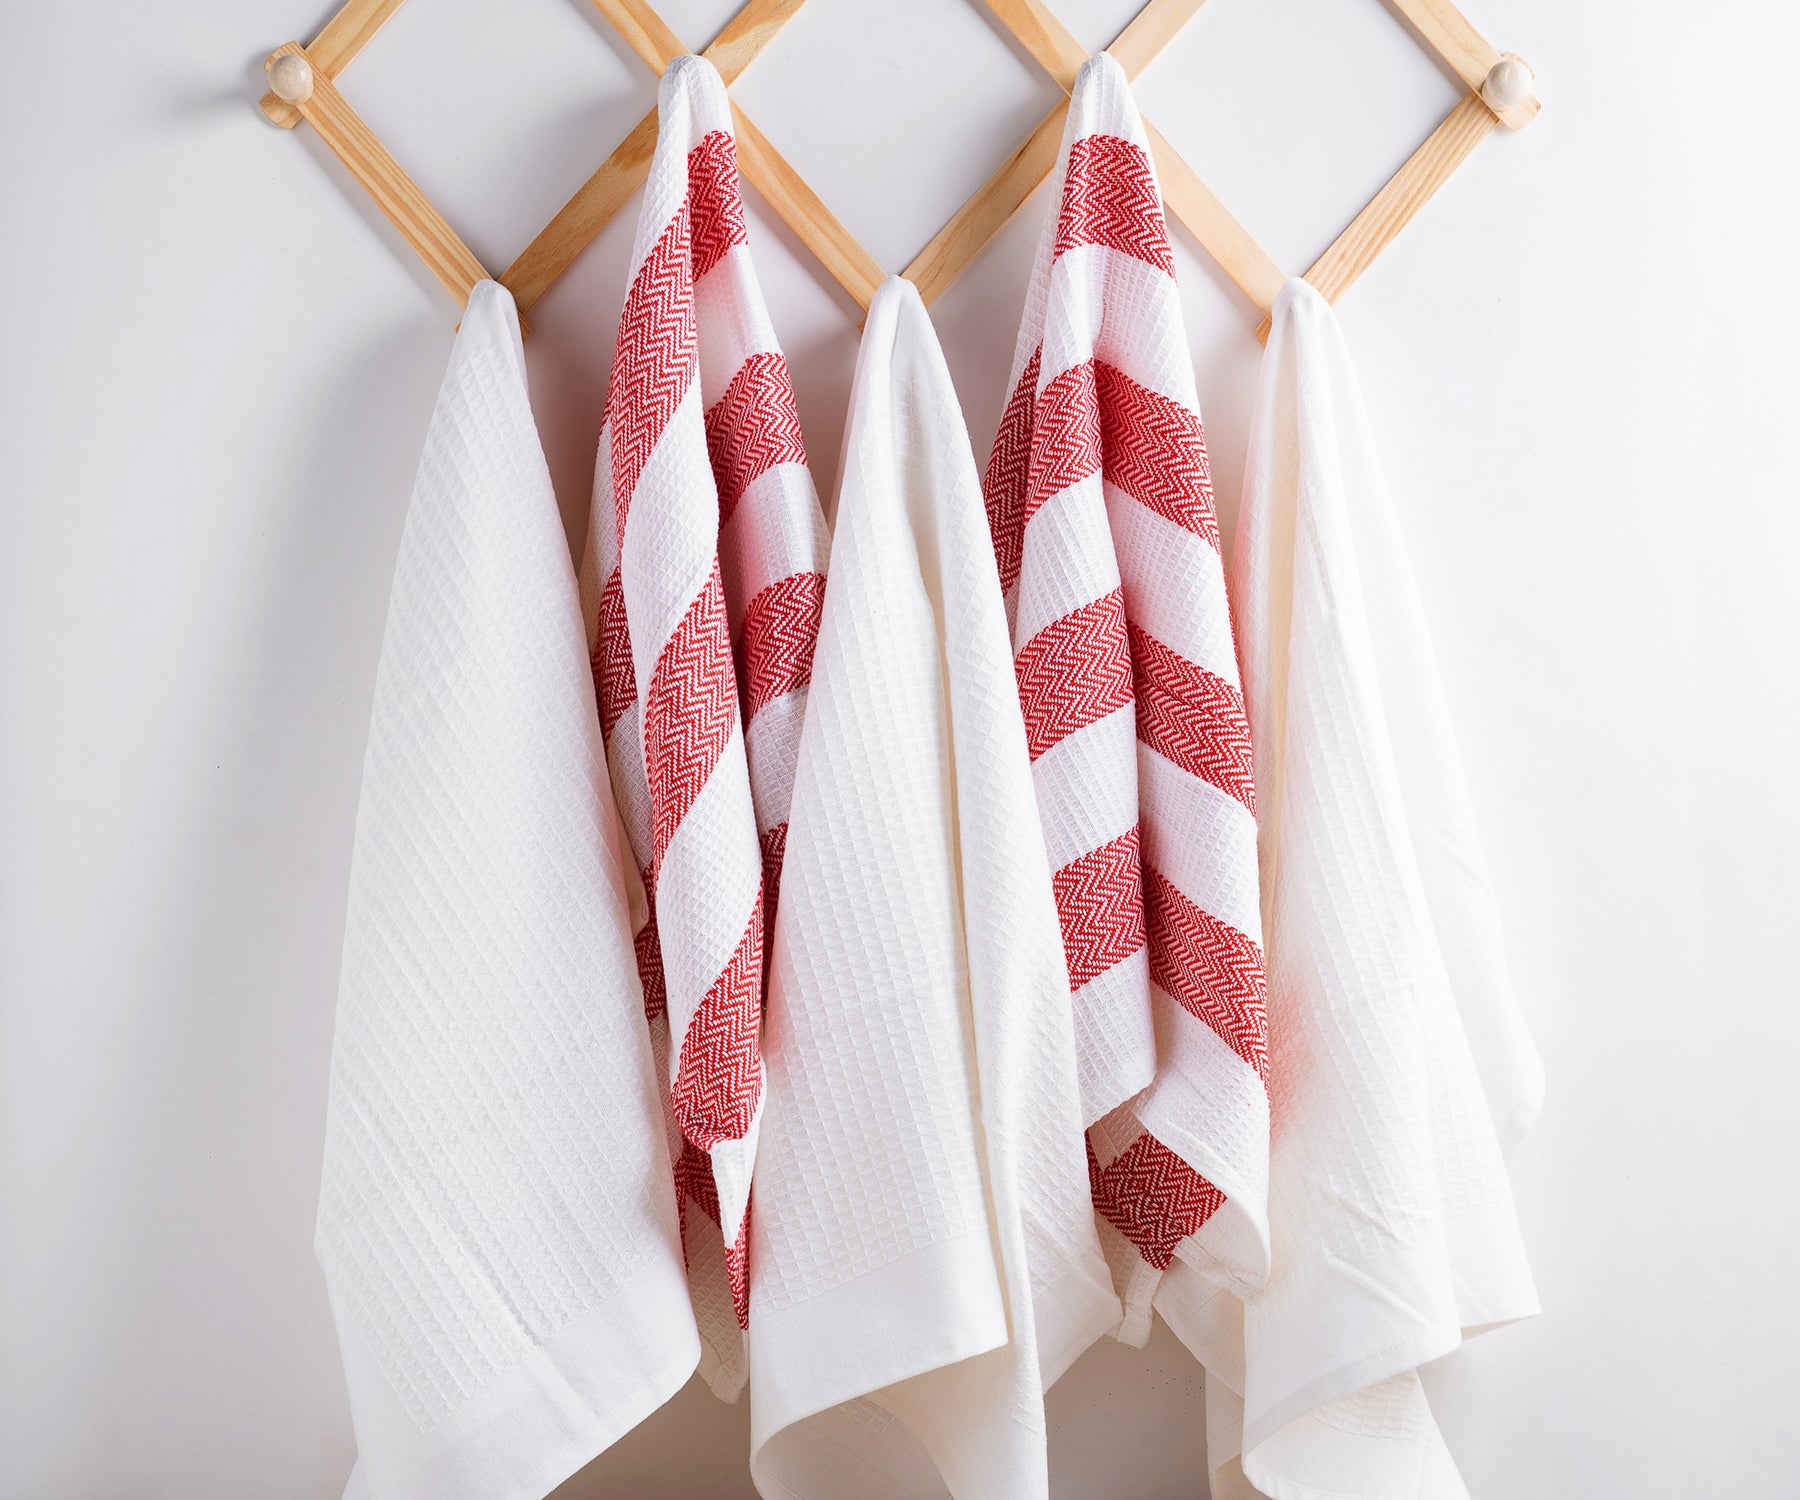 linen dish towels, white with red stripe kitchen towels, bar towels for kitchen.